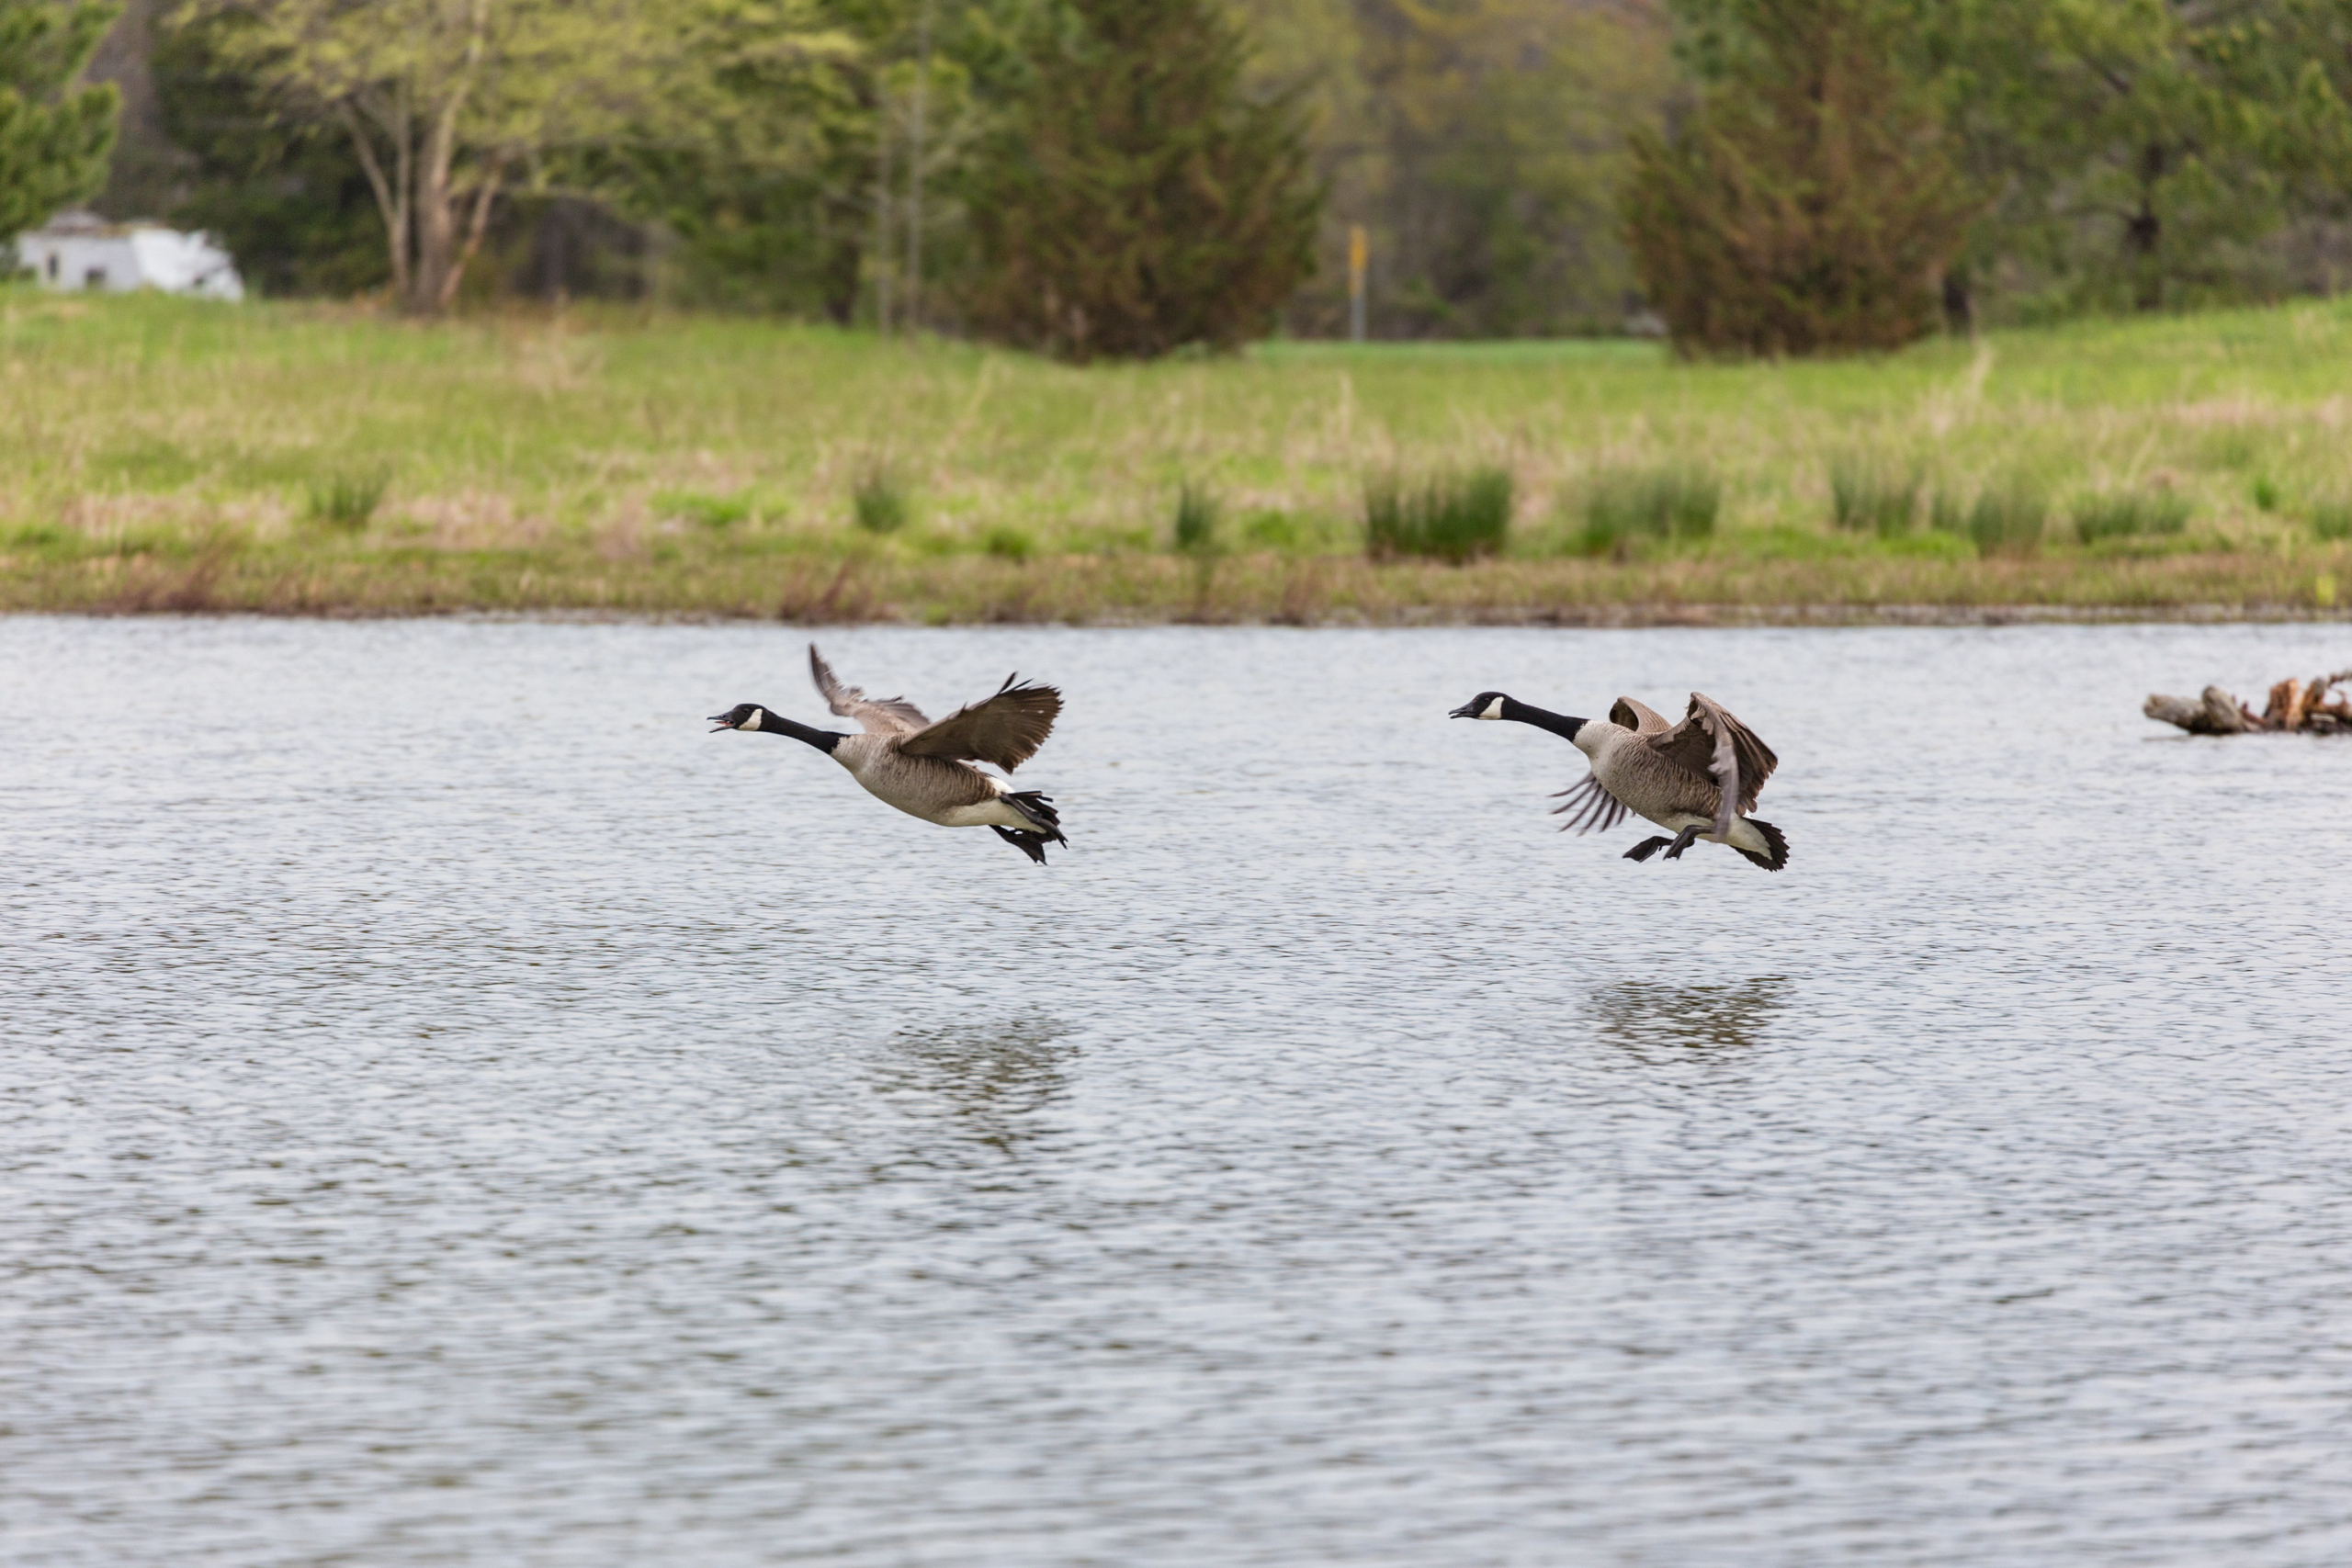 Geese landing in the restored wetland on Viola Farm. Matt and Marilyn Spong own a corn-and-soybean farm, located on the Delmarva. Viola Farms has been in Marilyn Spong’s family for well over 150 years. About 15 years ago they started the process of restoring a wetland habitat on their property. Photo: Kayt Jonsson / USFWS / Flickr